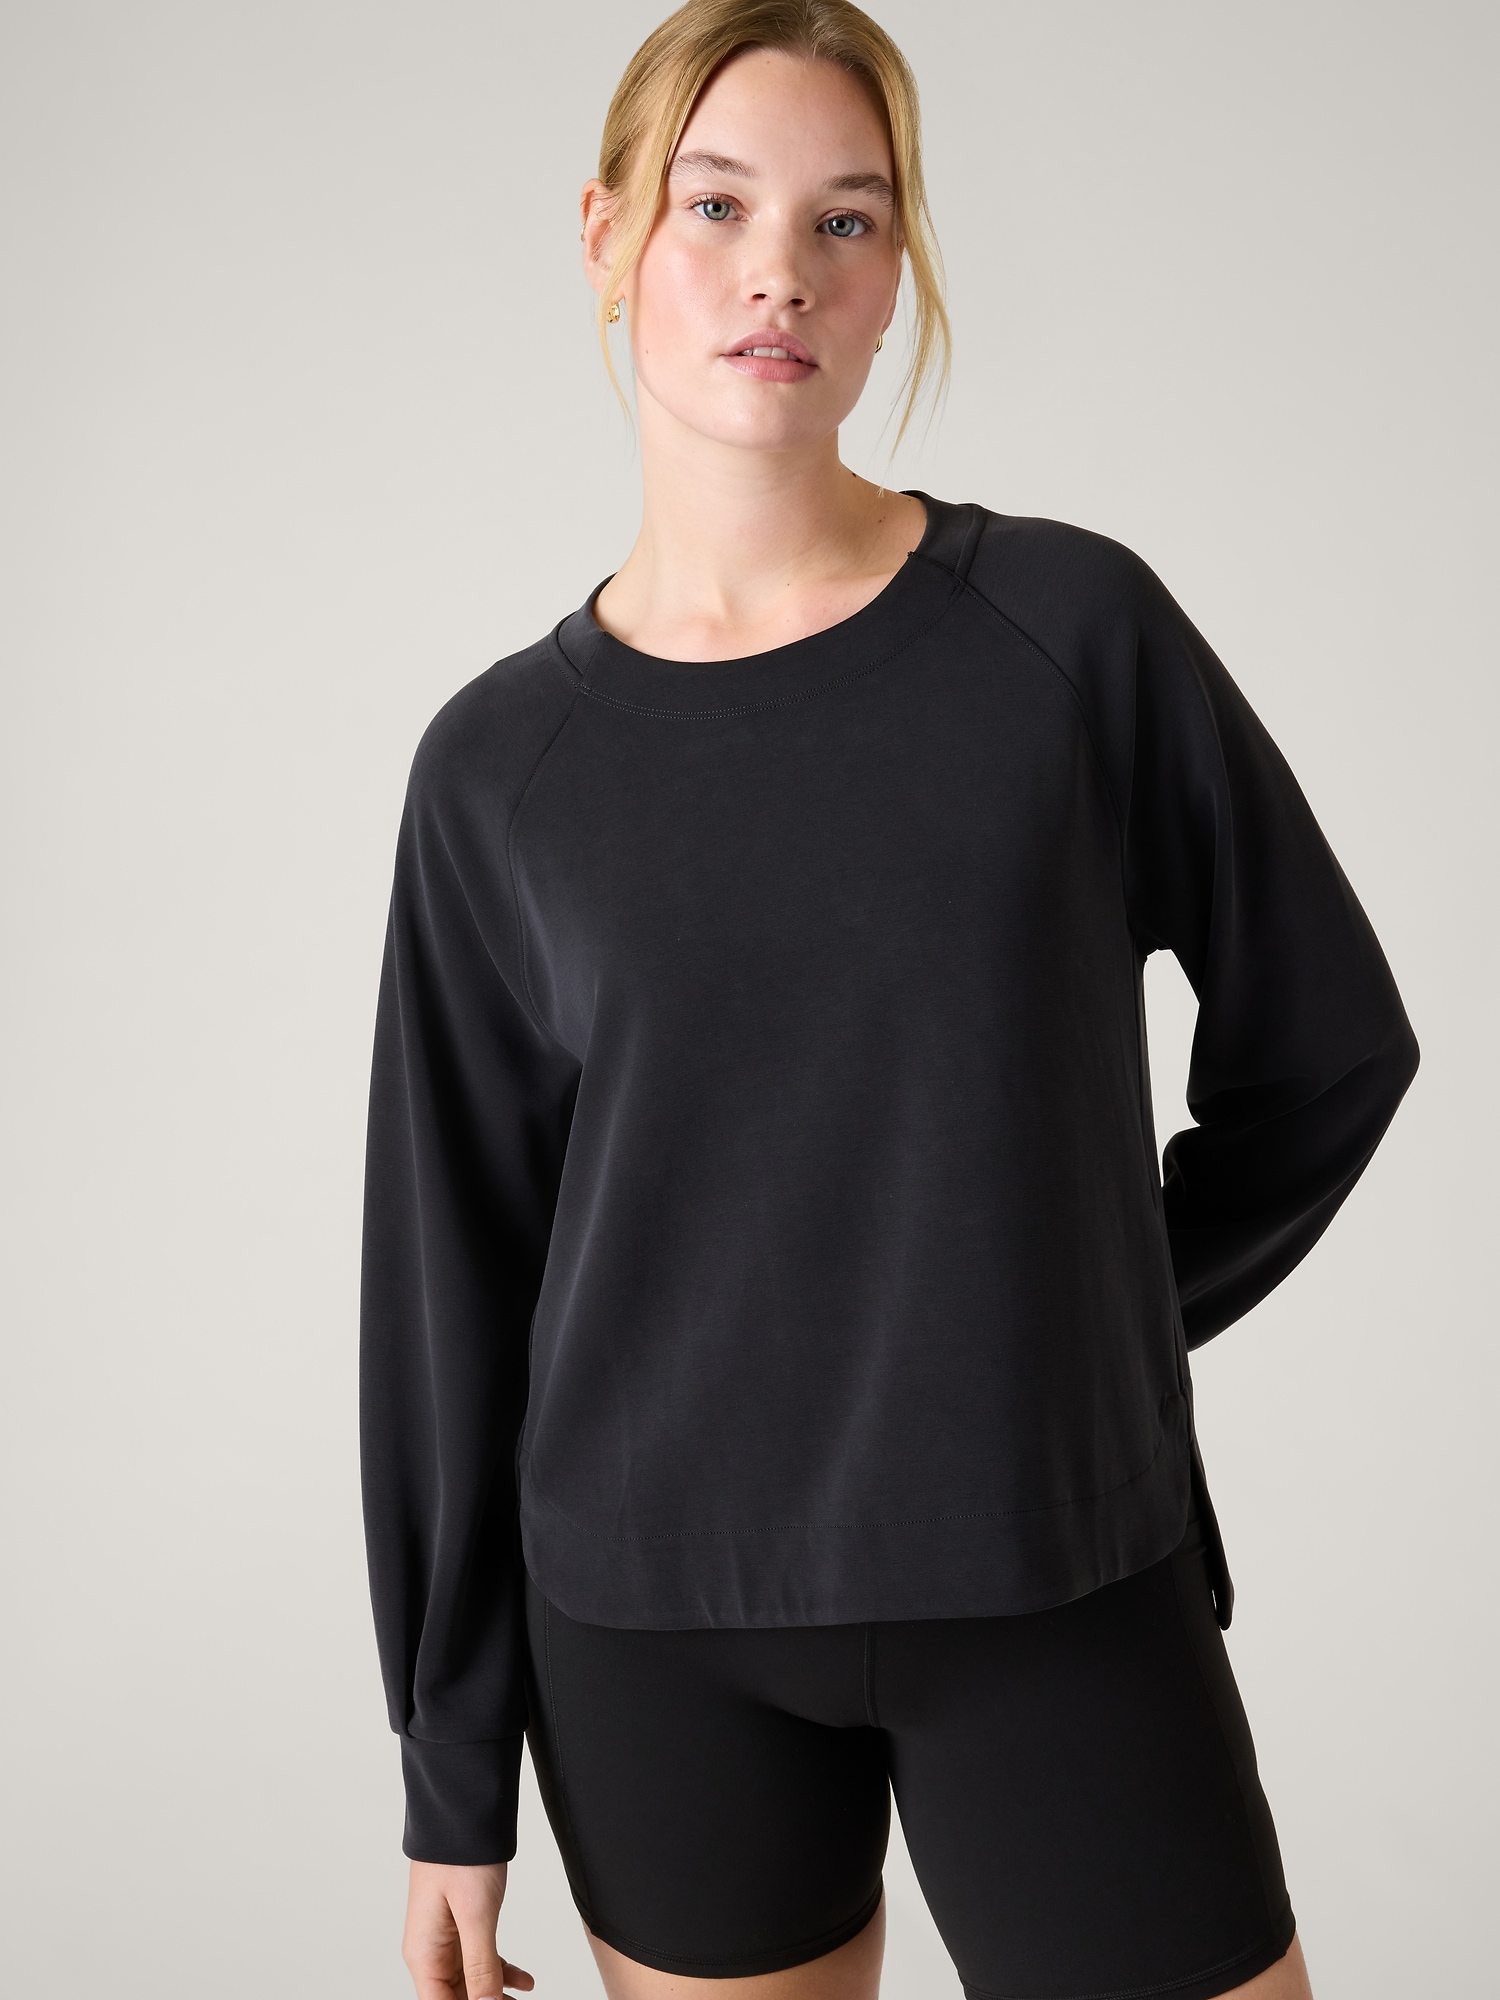 Athleta Crewneck Cozy Soft Long Sleeve Pullover Top with